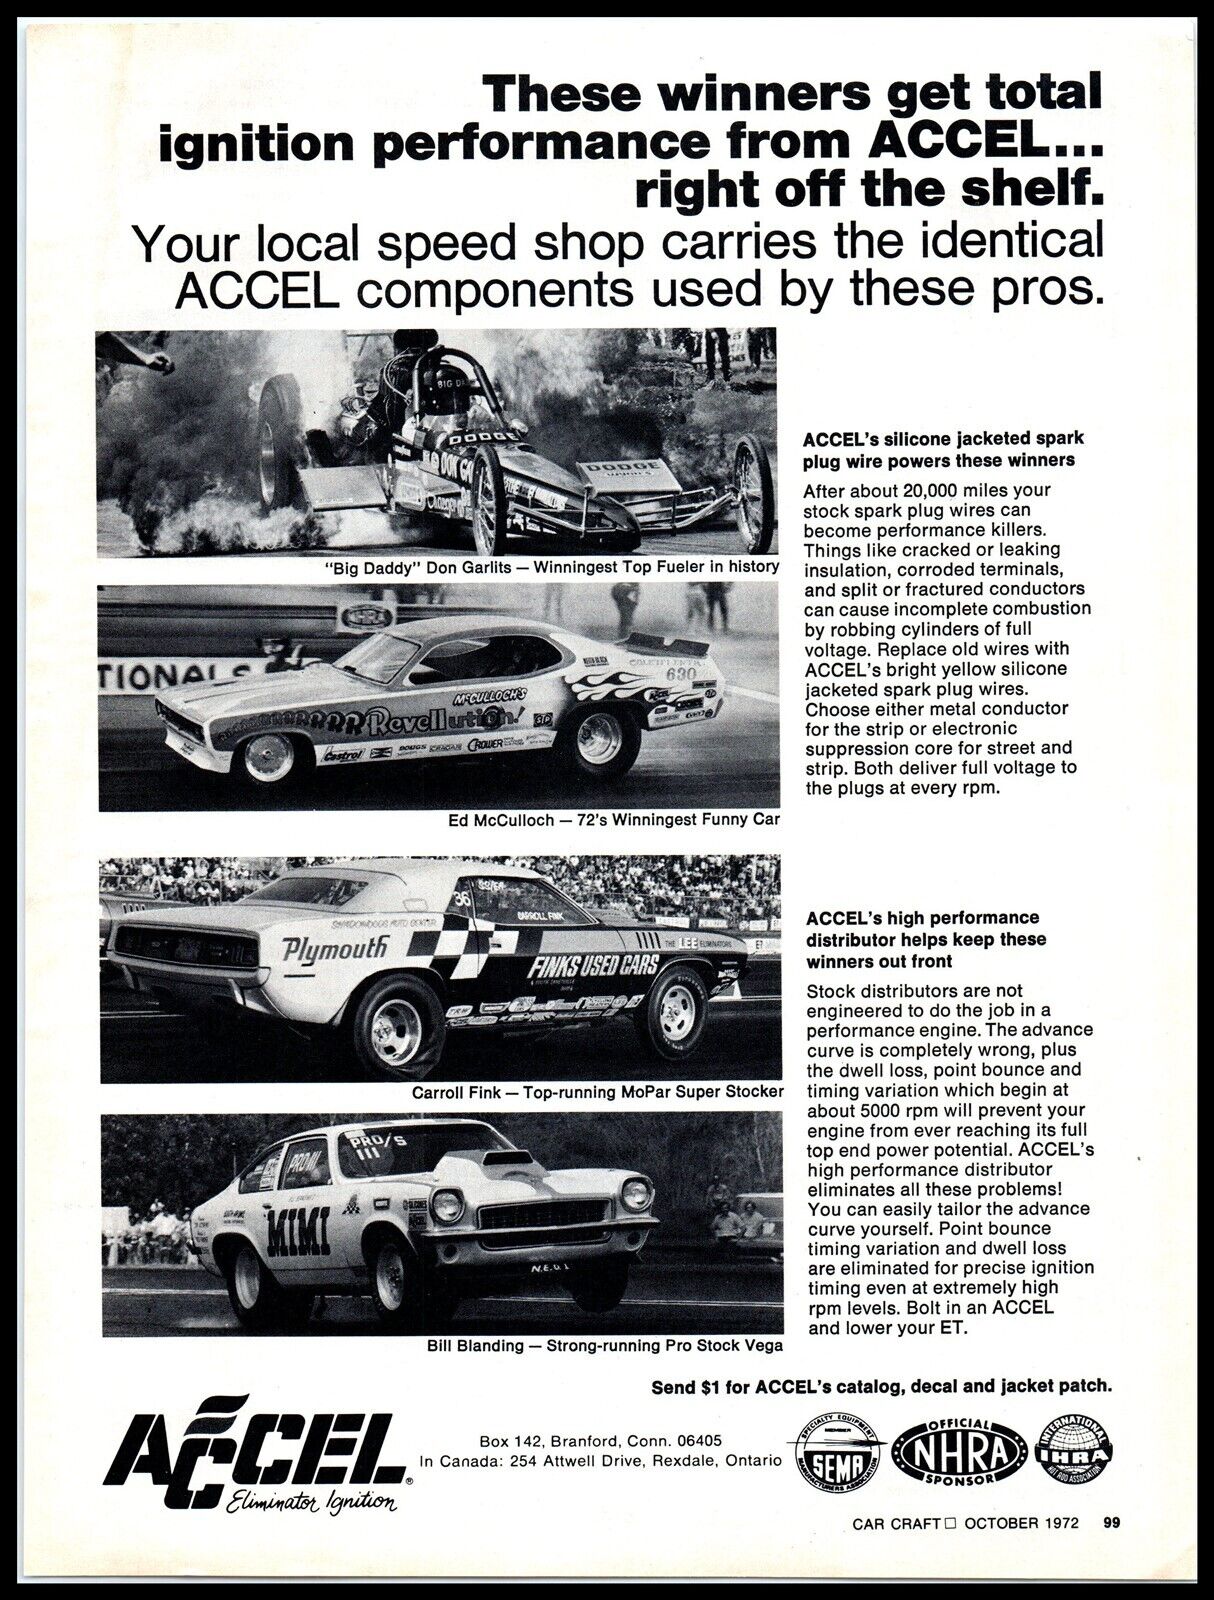 1972 Magazine Print Ad - ACCEL Ignition, Don Garlits, McCulloch Fink Blanding A7